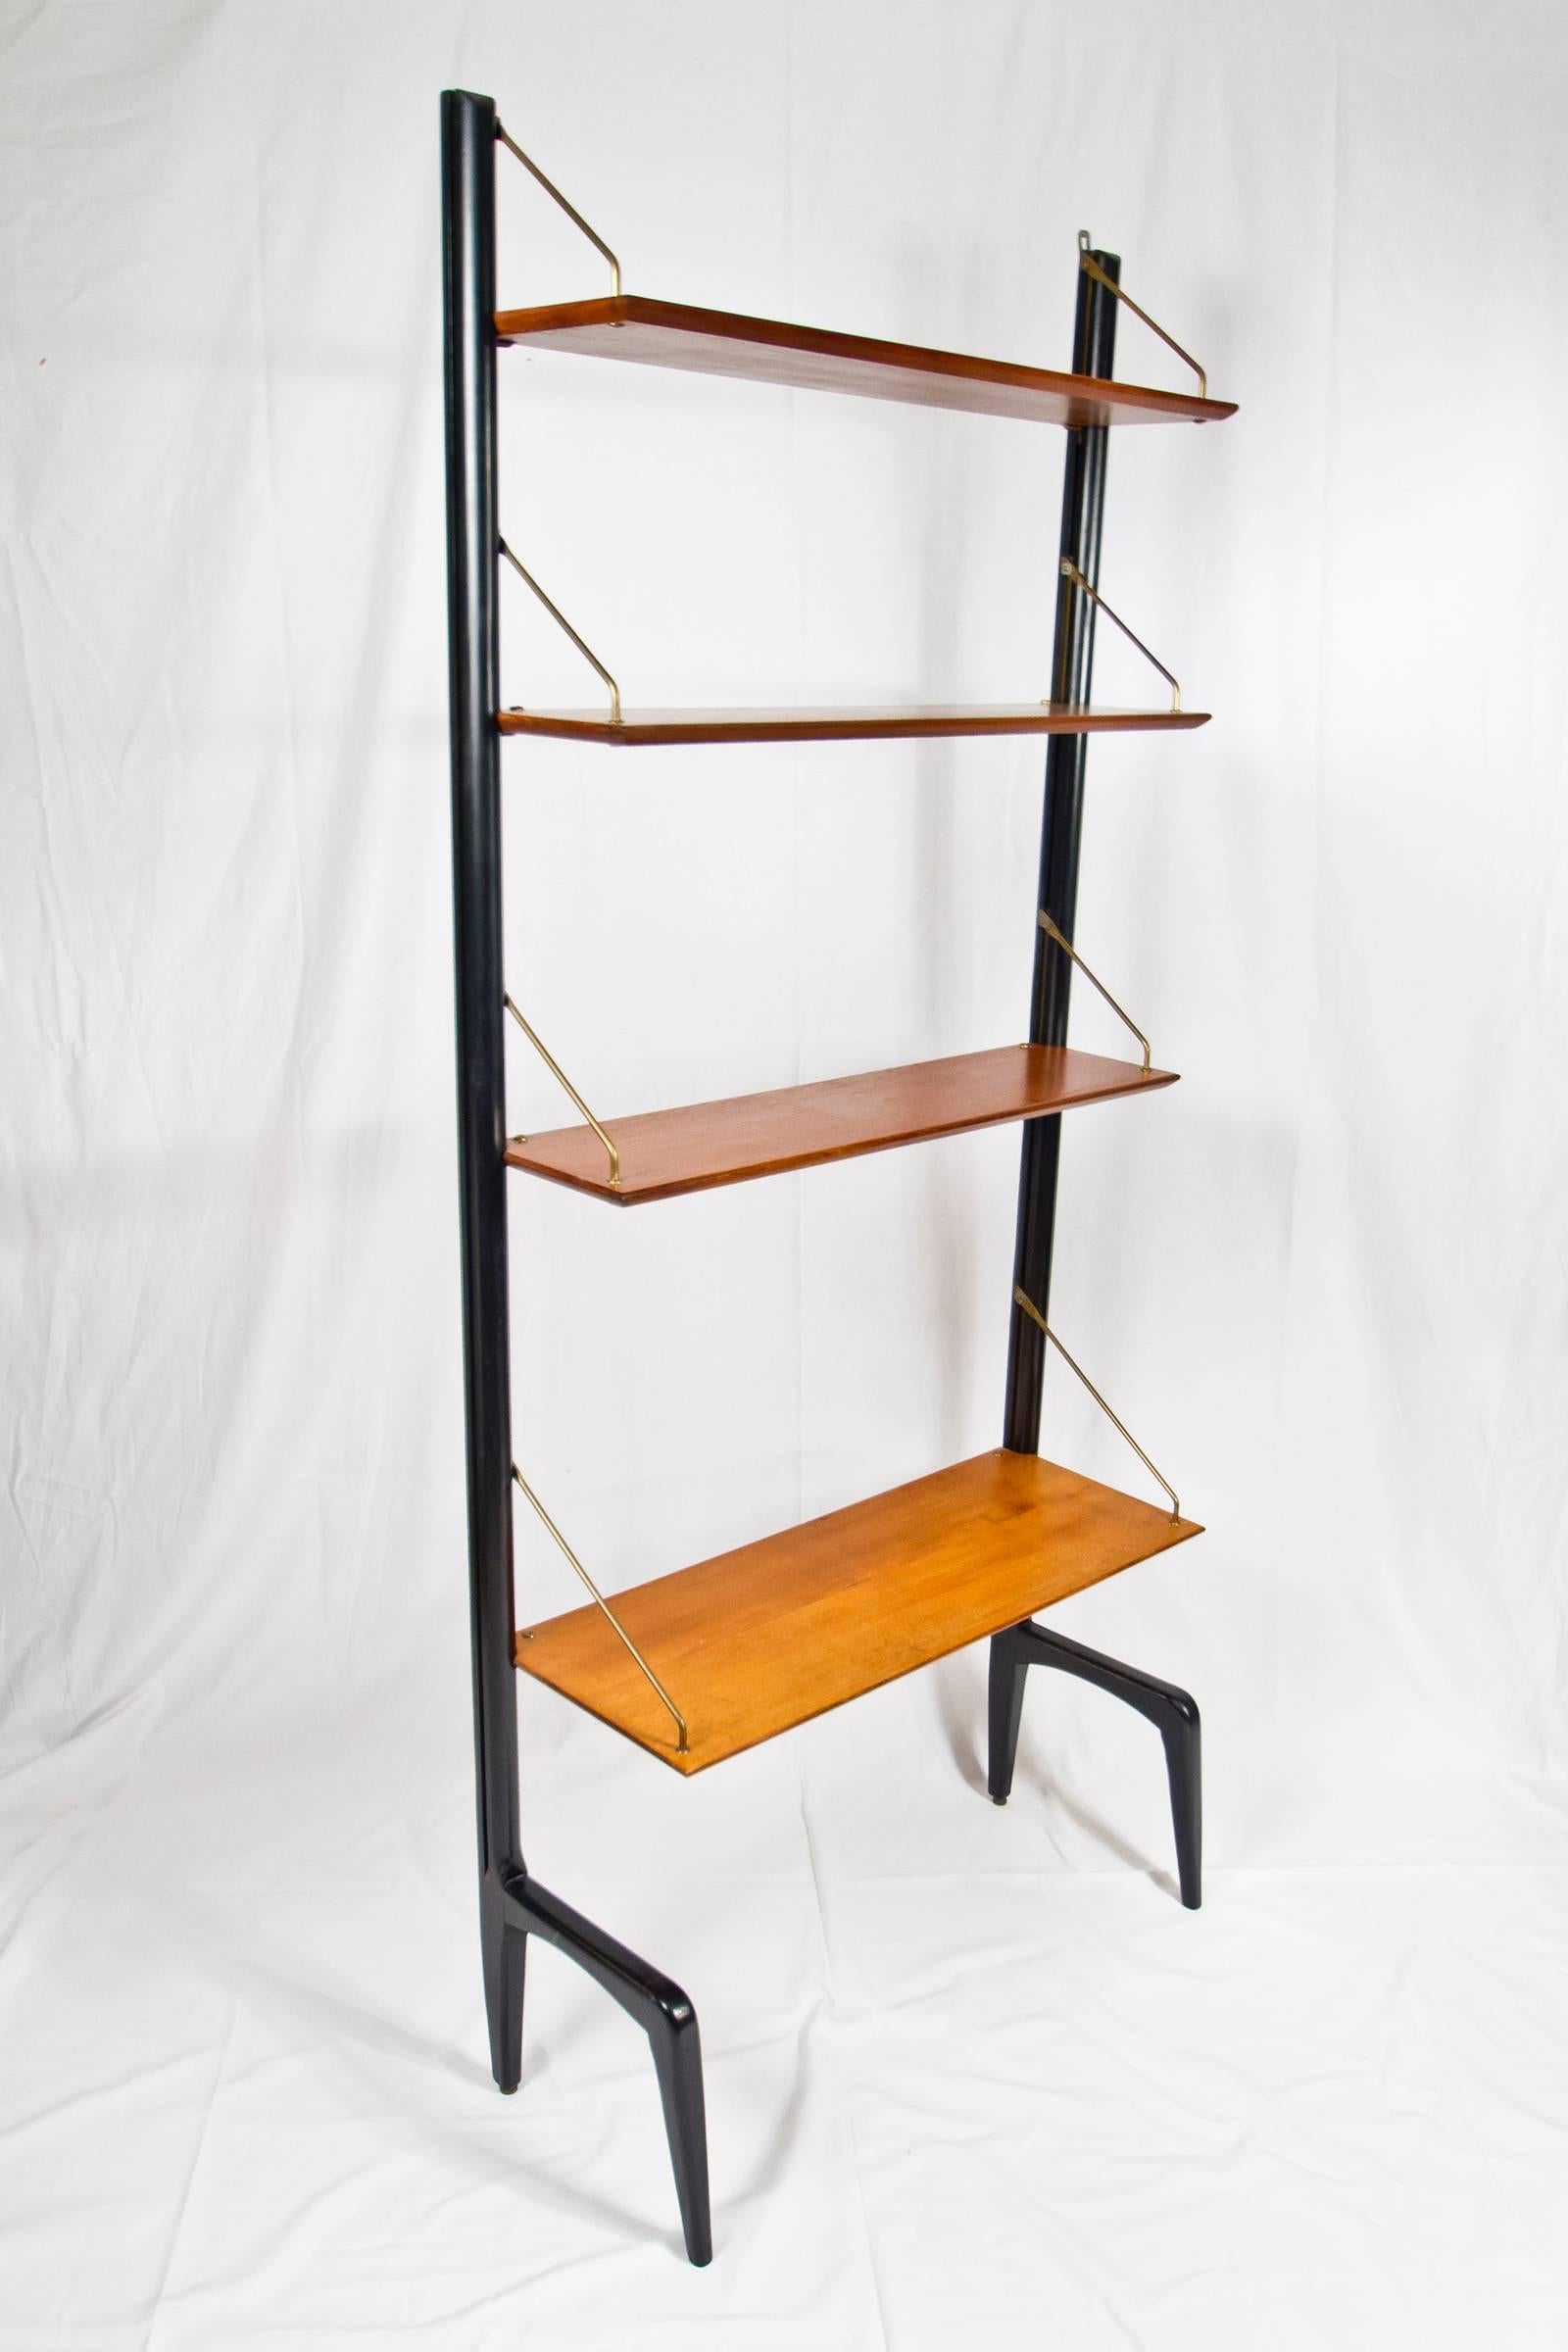 Beautiful modular shelving system in blackwood, teak and brass hardware, designed by Louis Van Teeffelen, 1950s. It's a modular design which can be extended. More shelves like this one can be stacked next to each other.

Excellent vintage